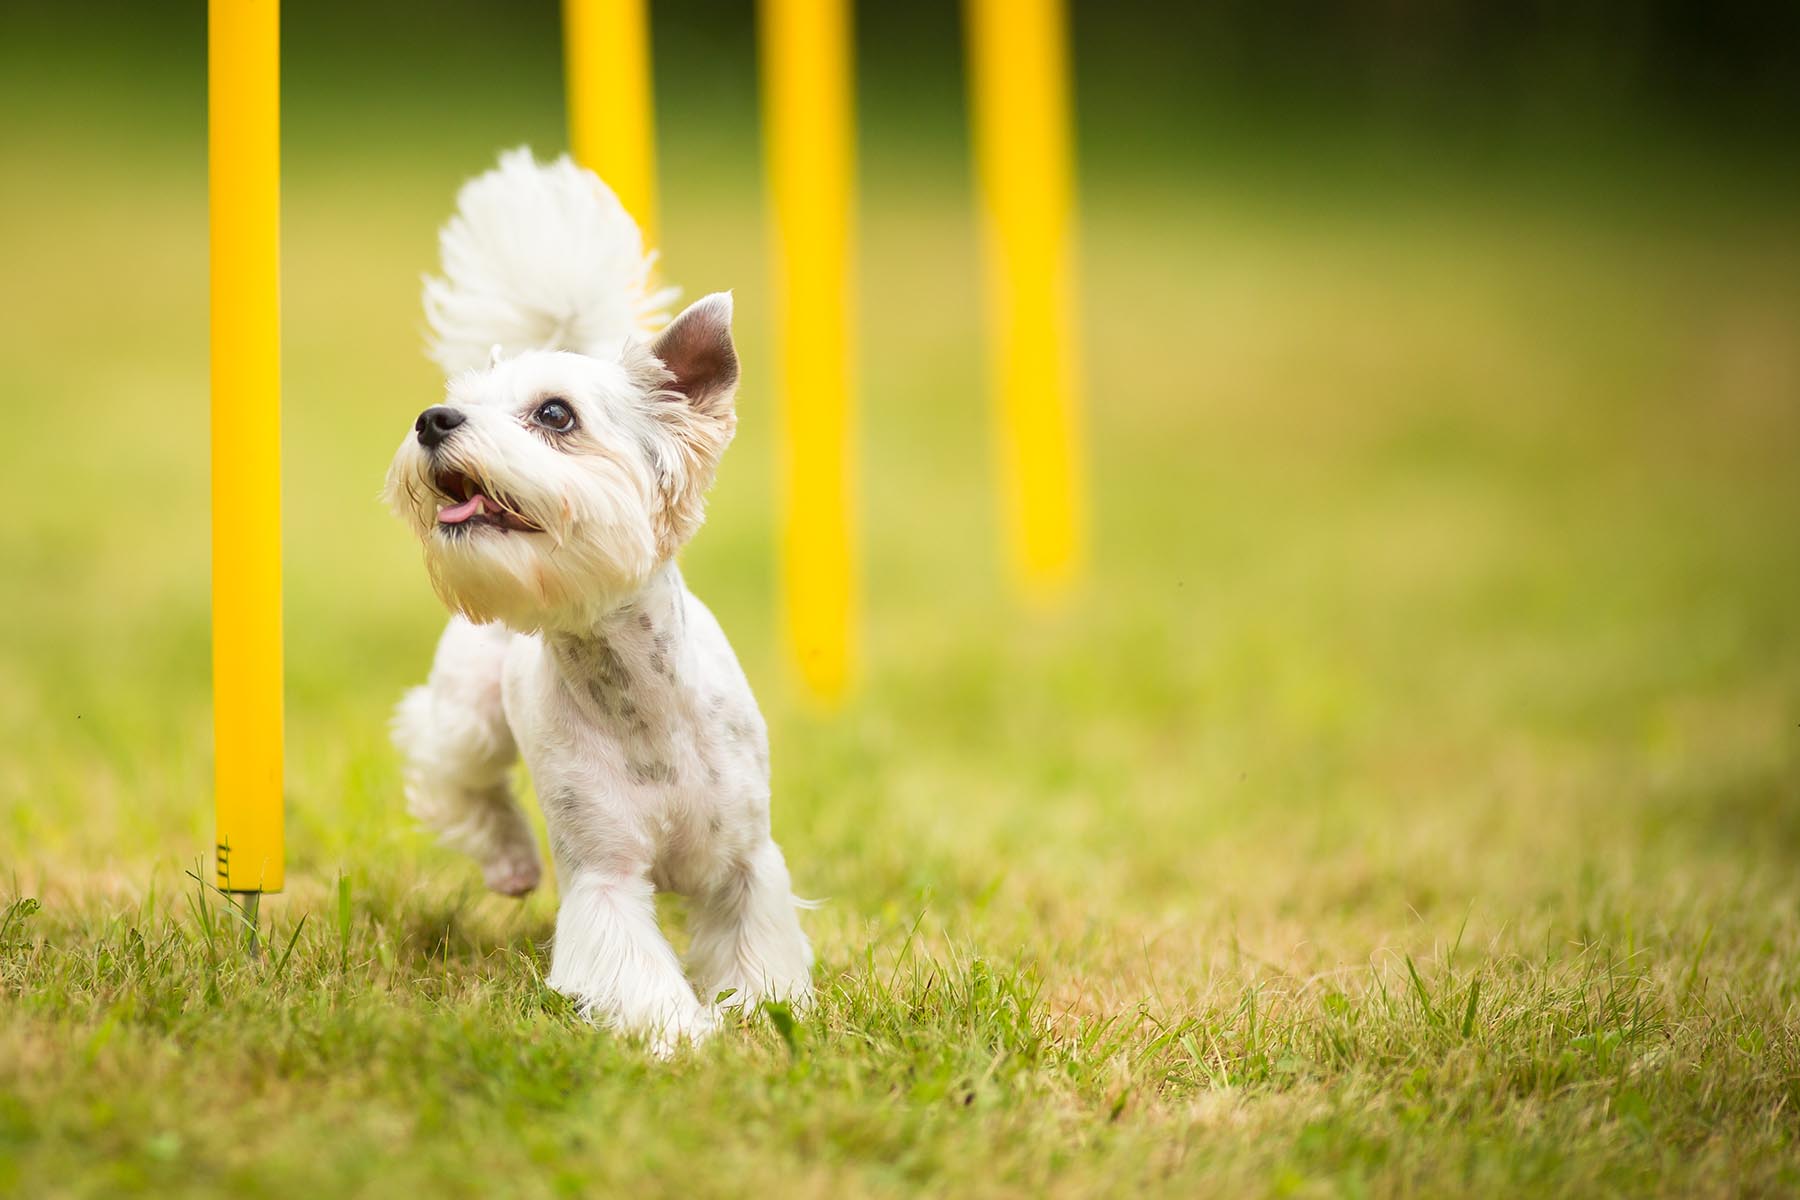 Cute Little Dog Doing Agility Drill   Running Slalom, Being Obed